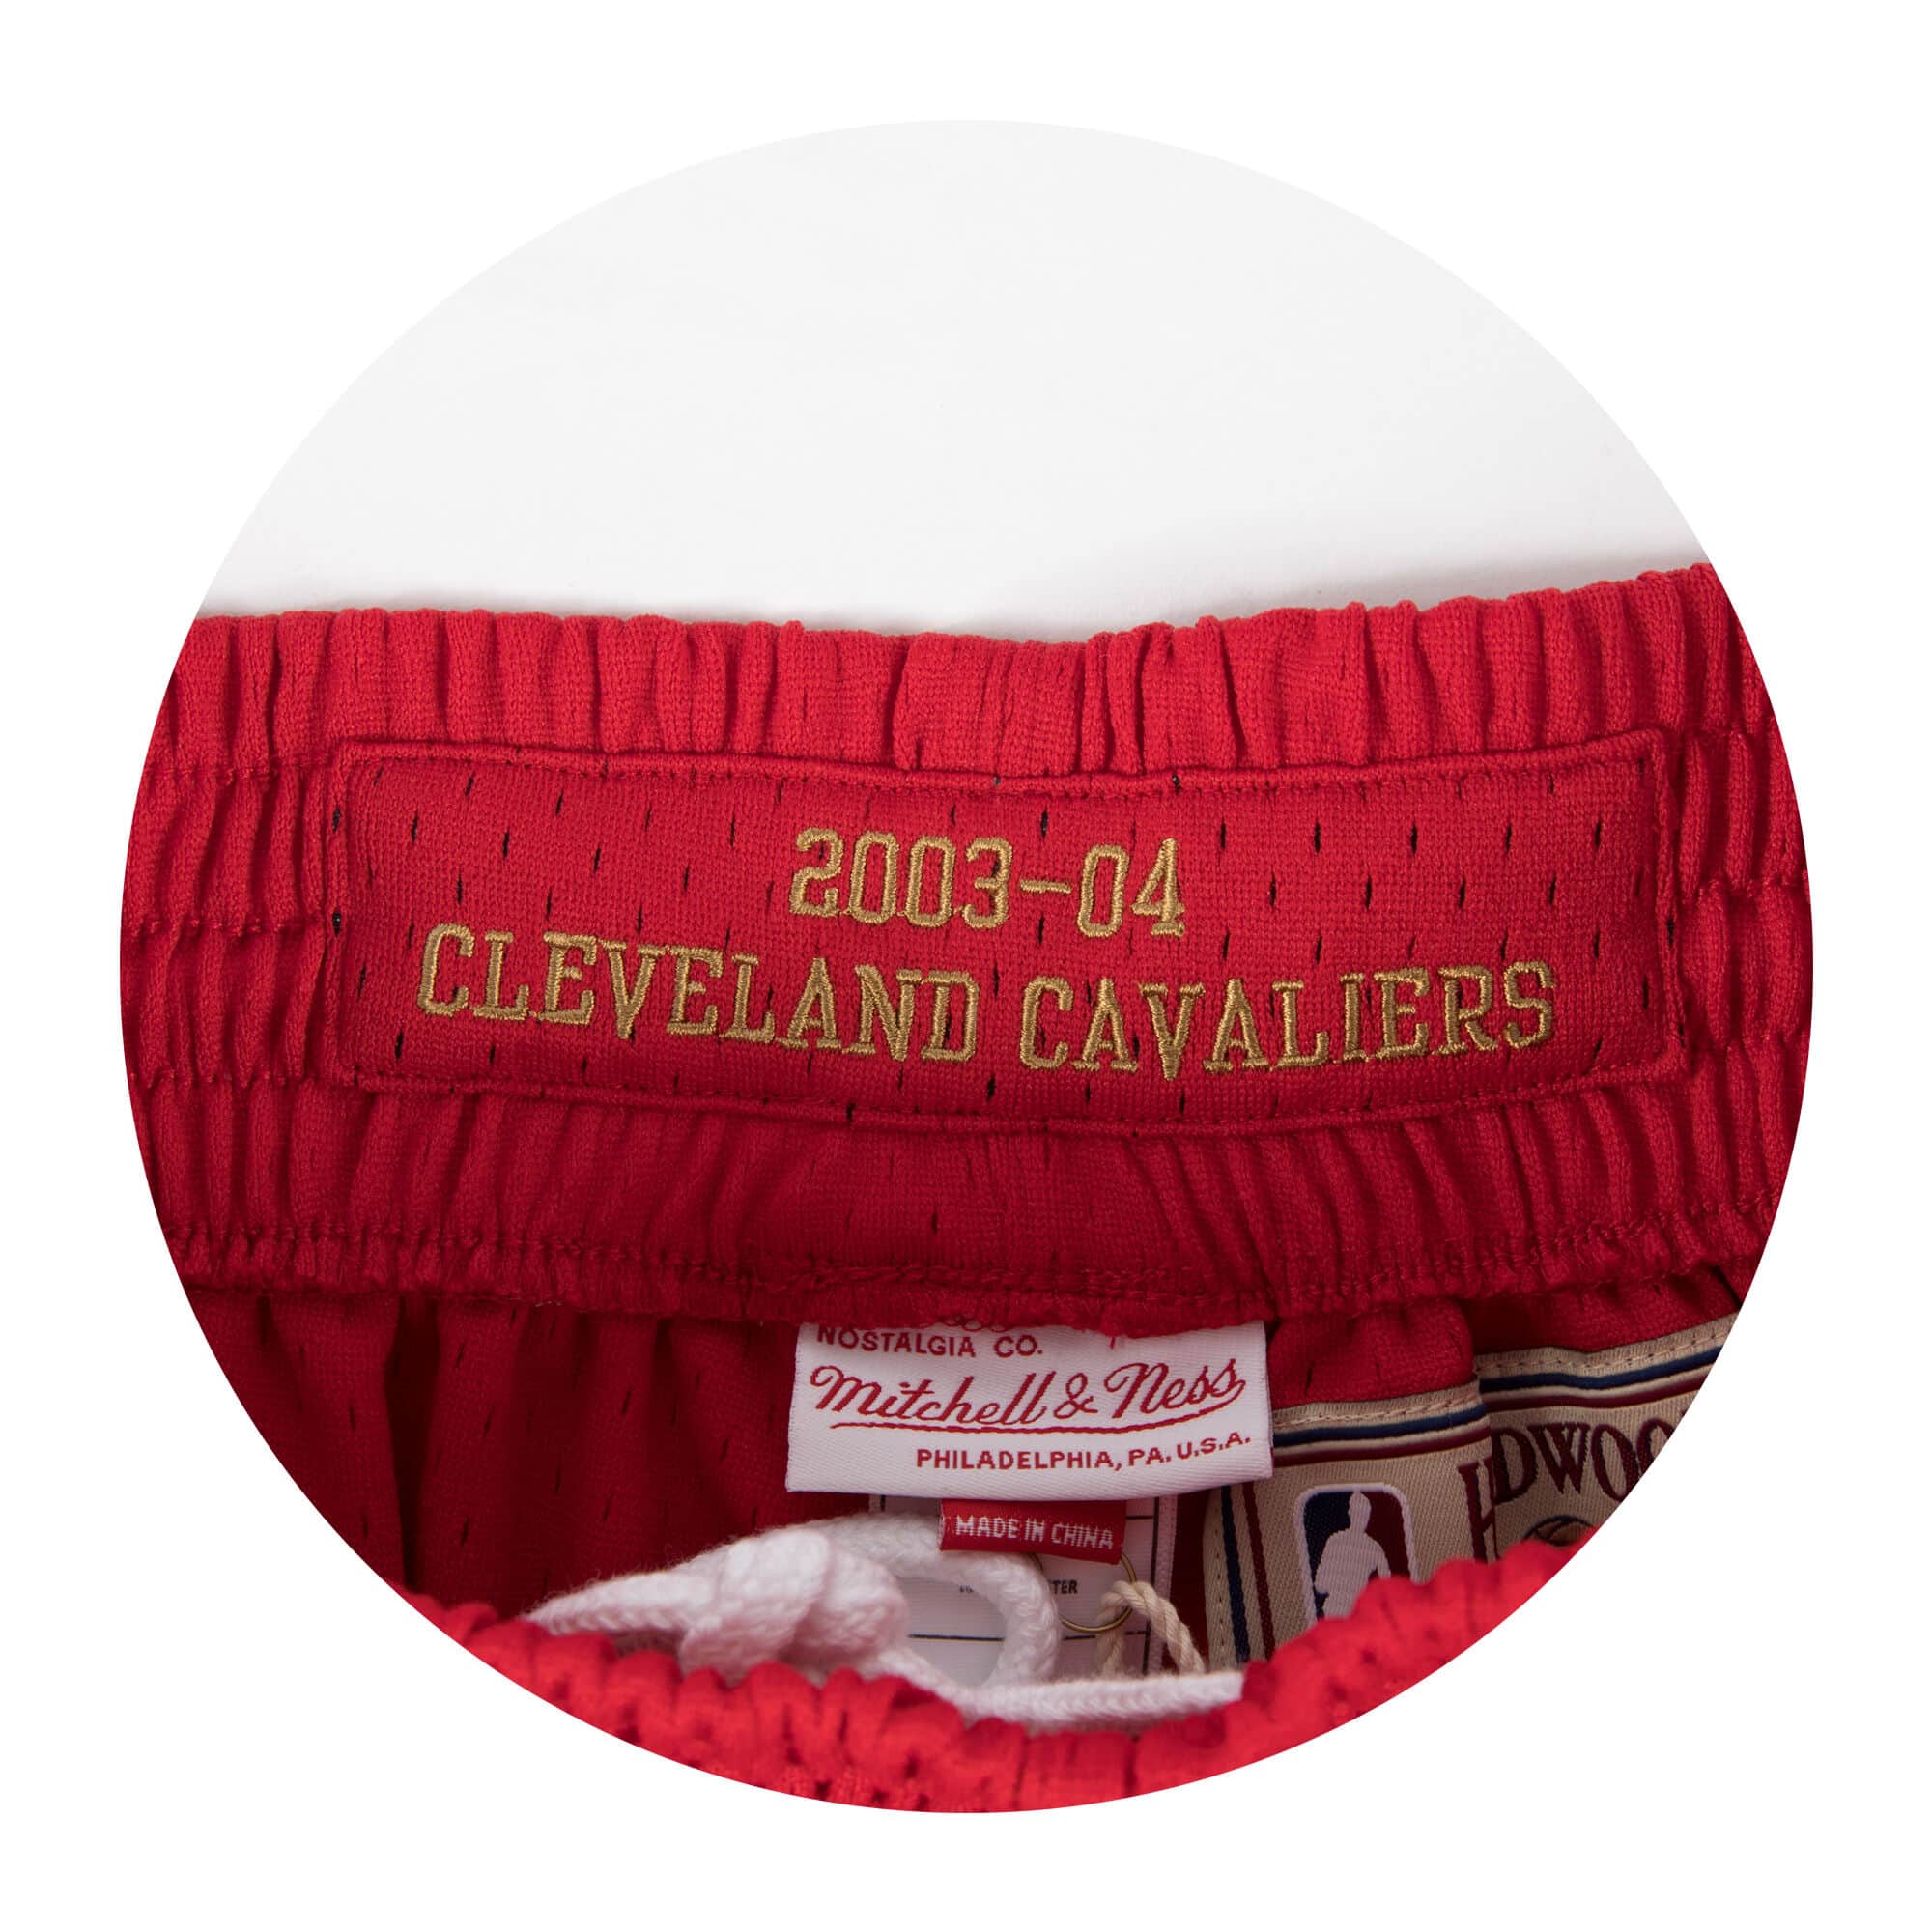 Mitchell & Ness NBA Authentic Shorts Cleveland Cavaliers Dark Red ASHCCADR03 - SHORTS - Solestop.com - Canada